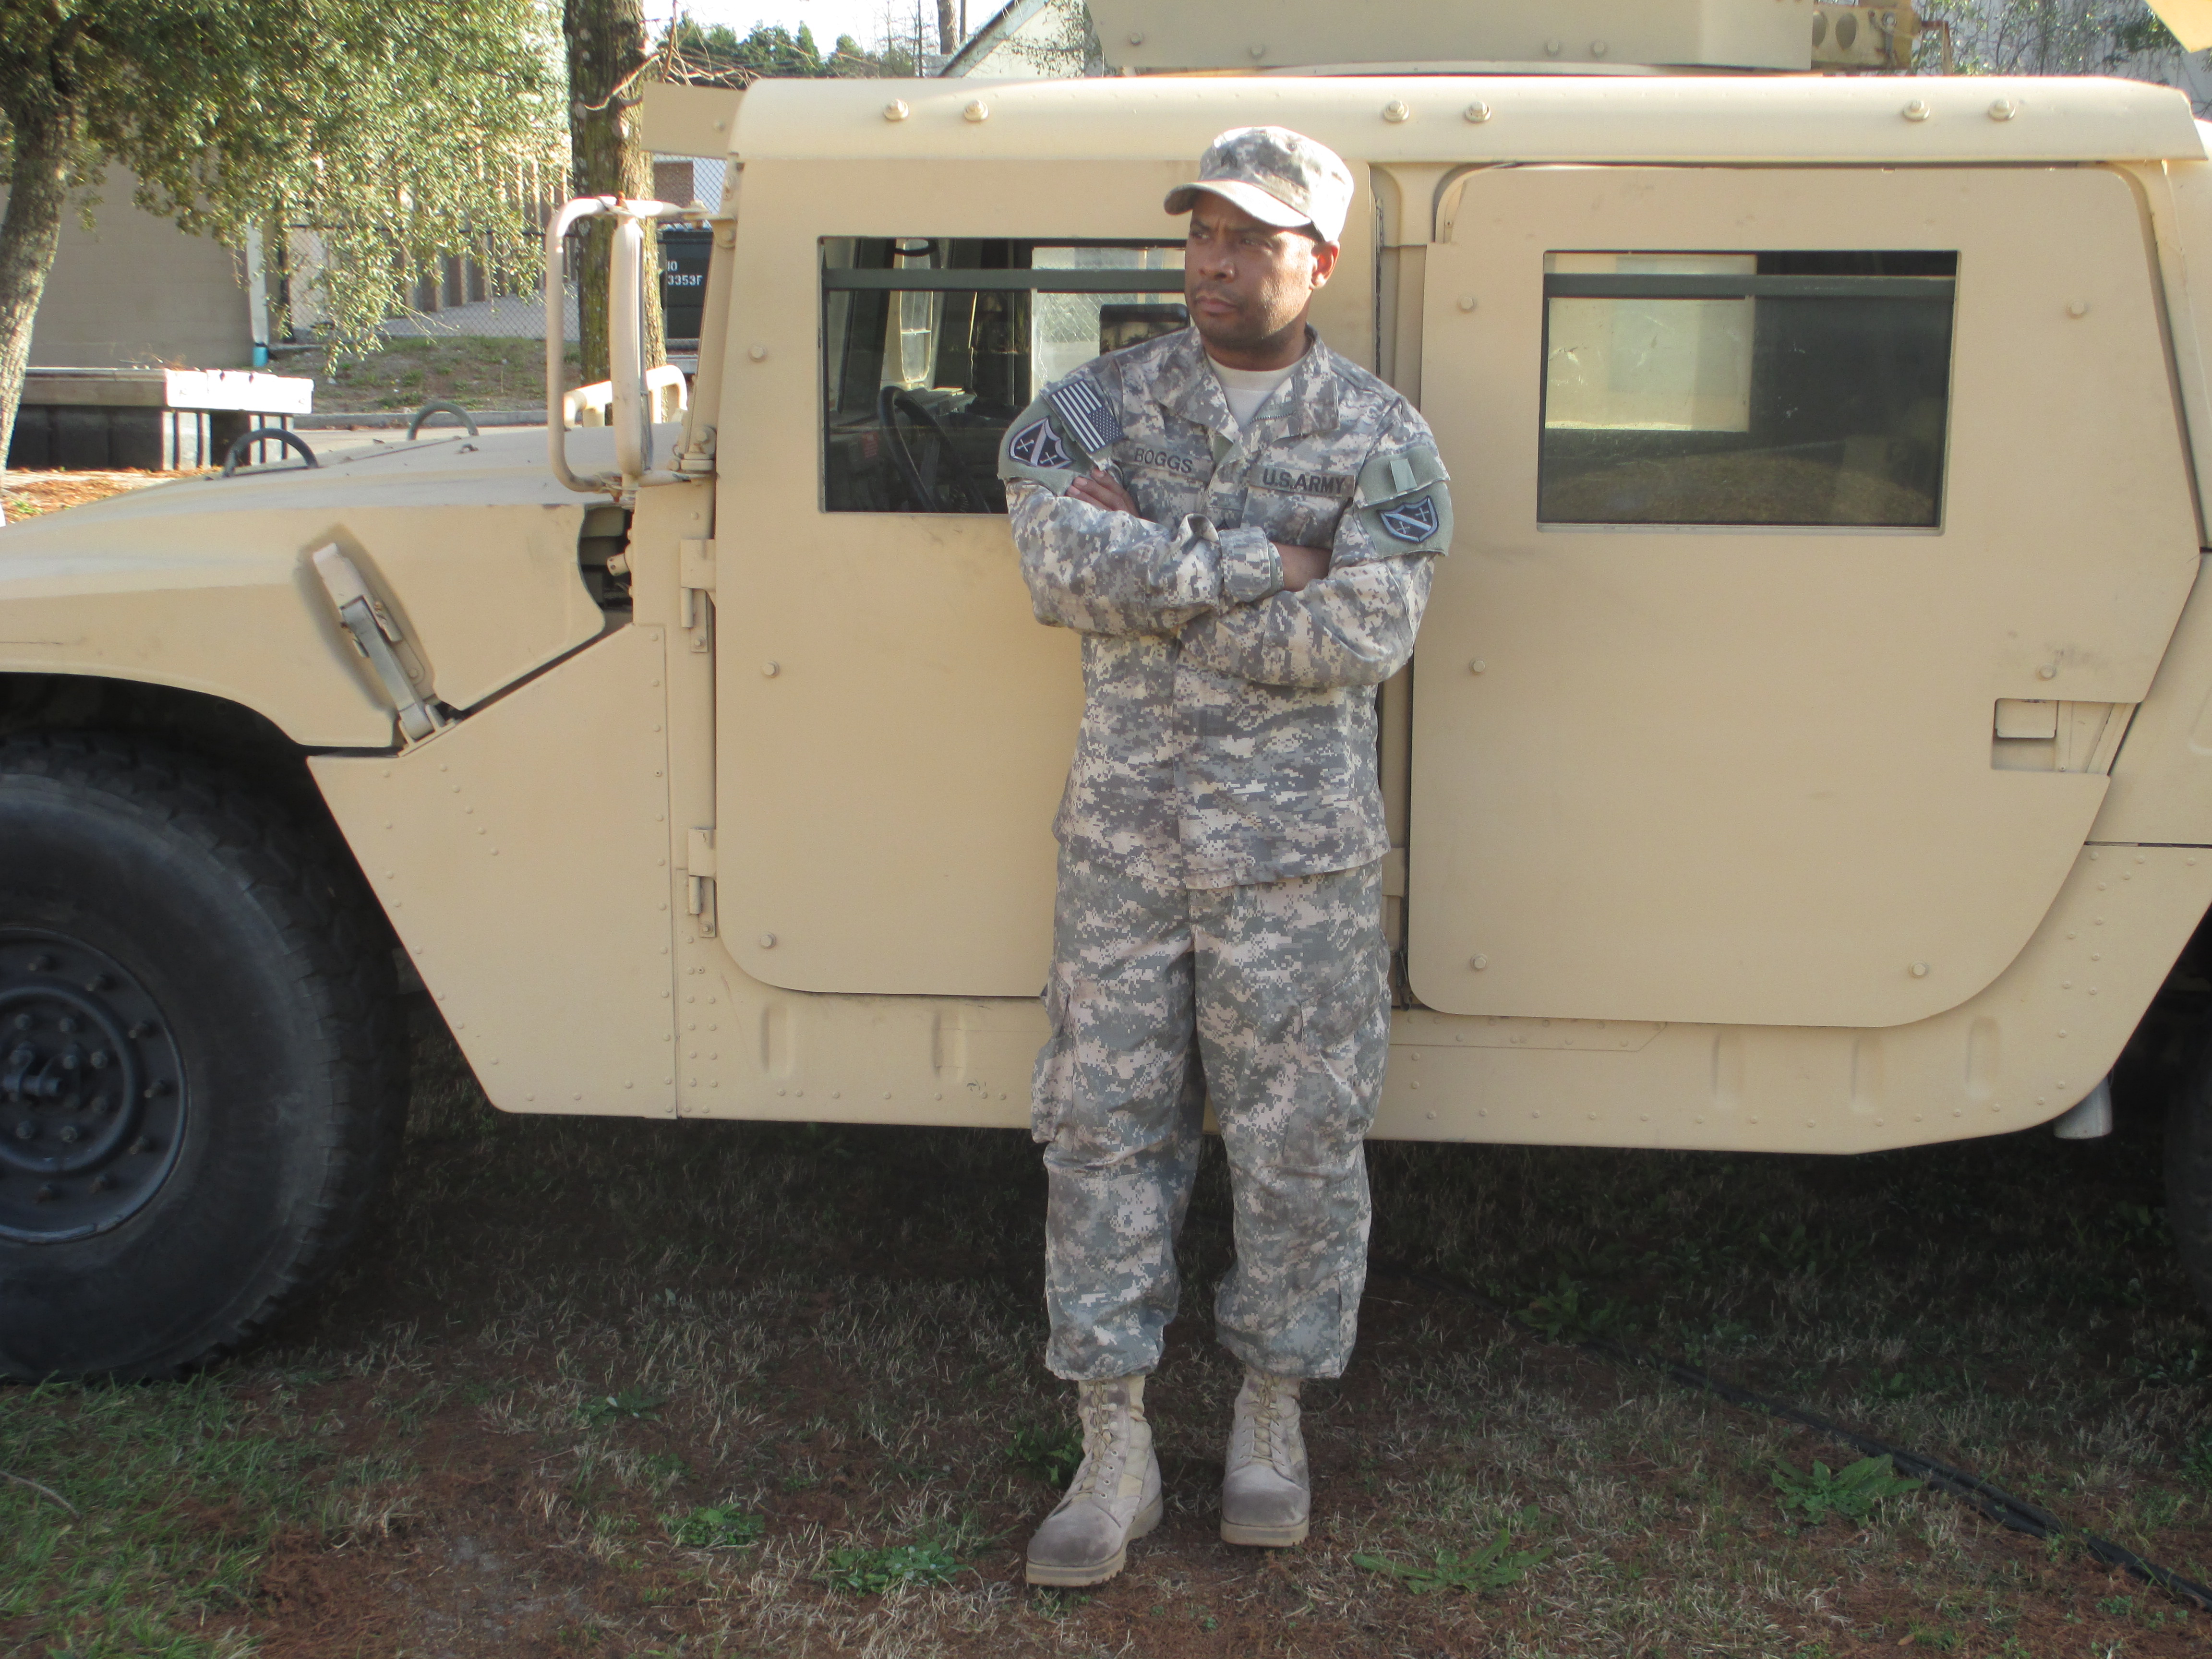 MikeRay as SGT. Boggs (ArmyWives)